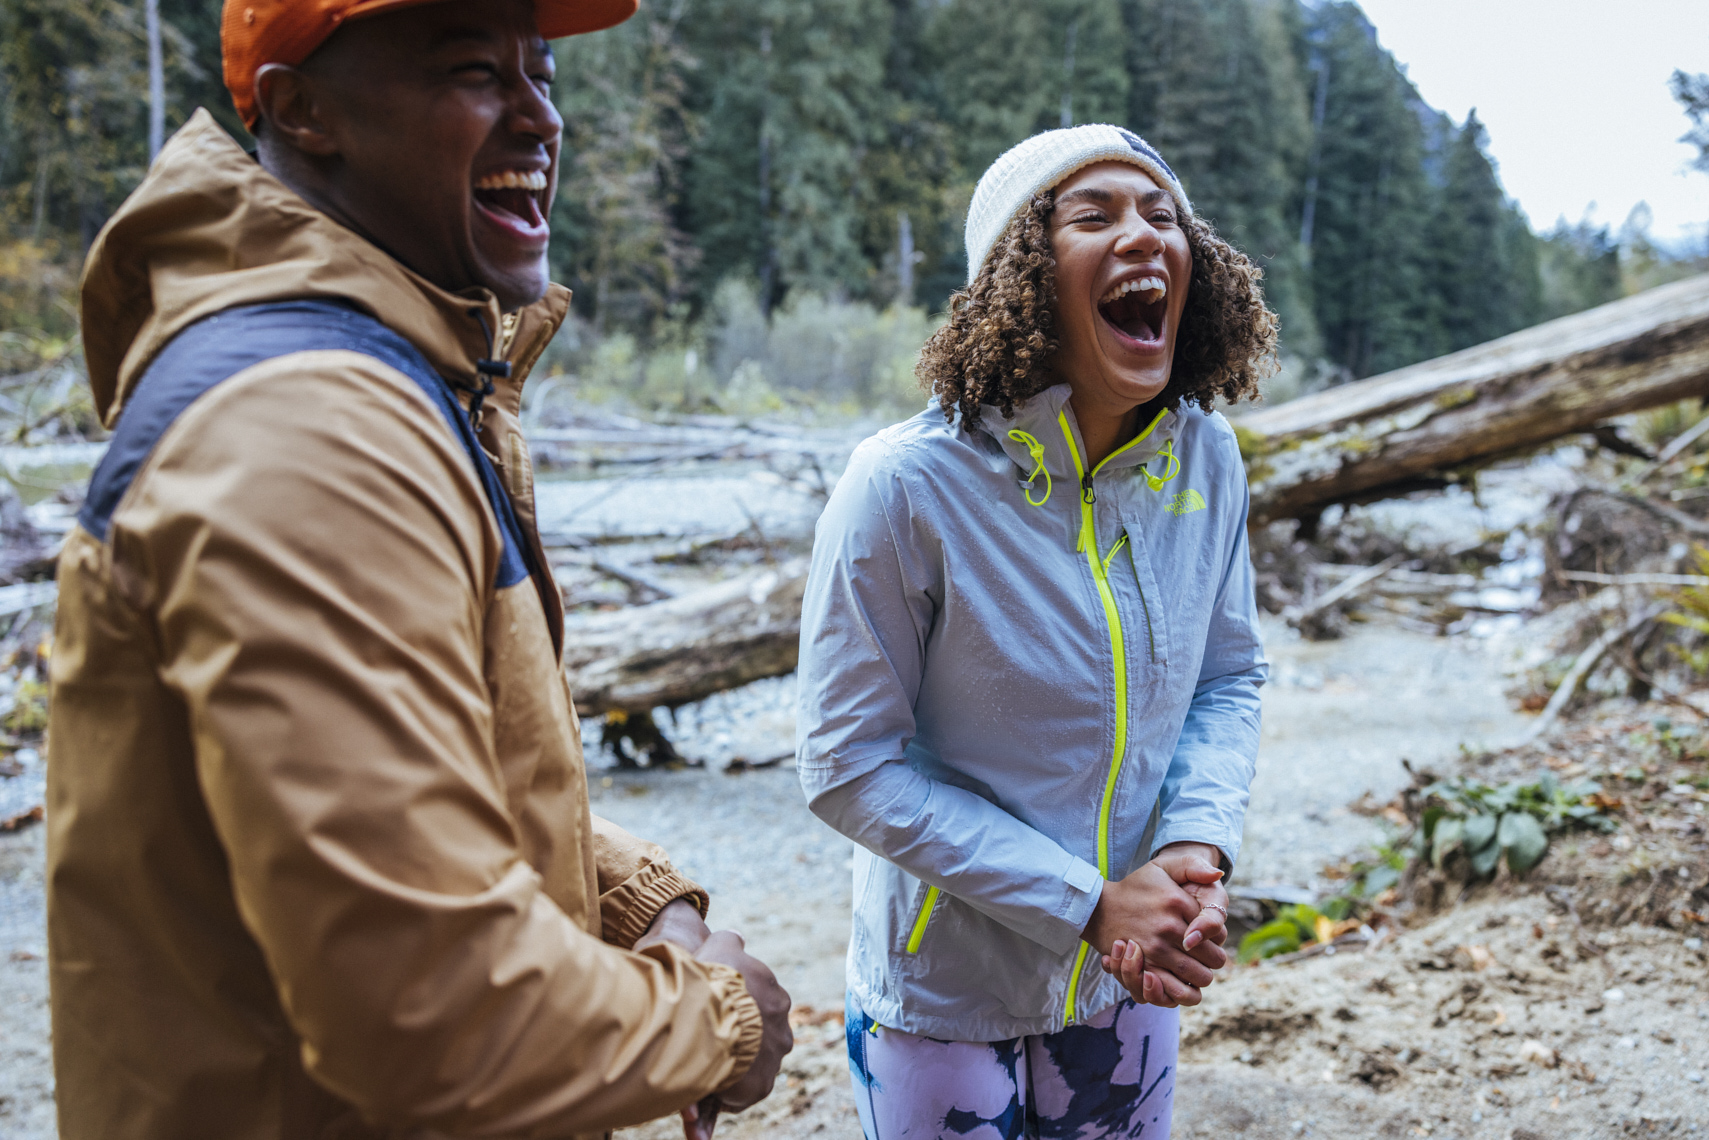 The North Face Spring 2023 Rain Wear | Fashion & Fitness | Michael Kunde Photo